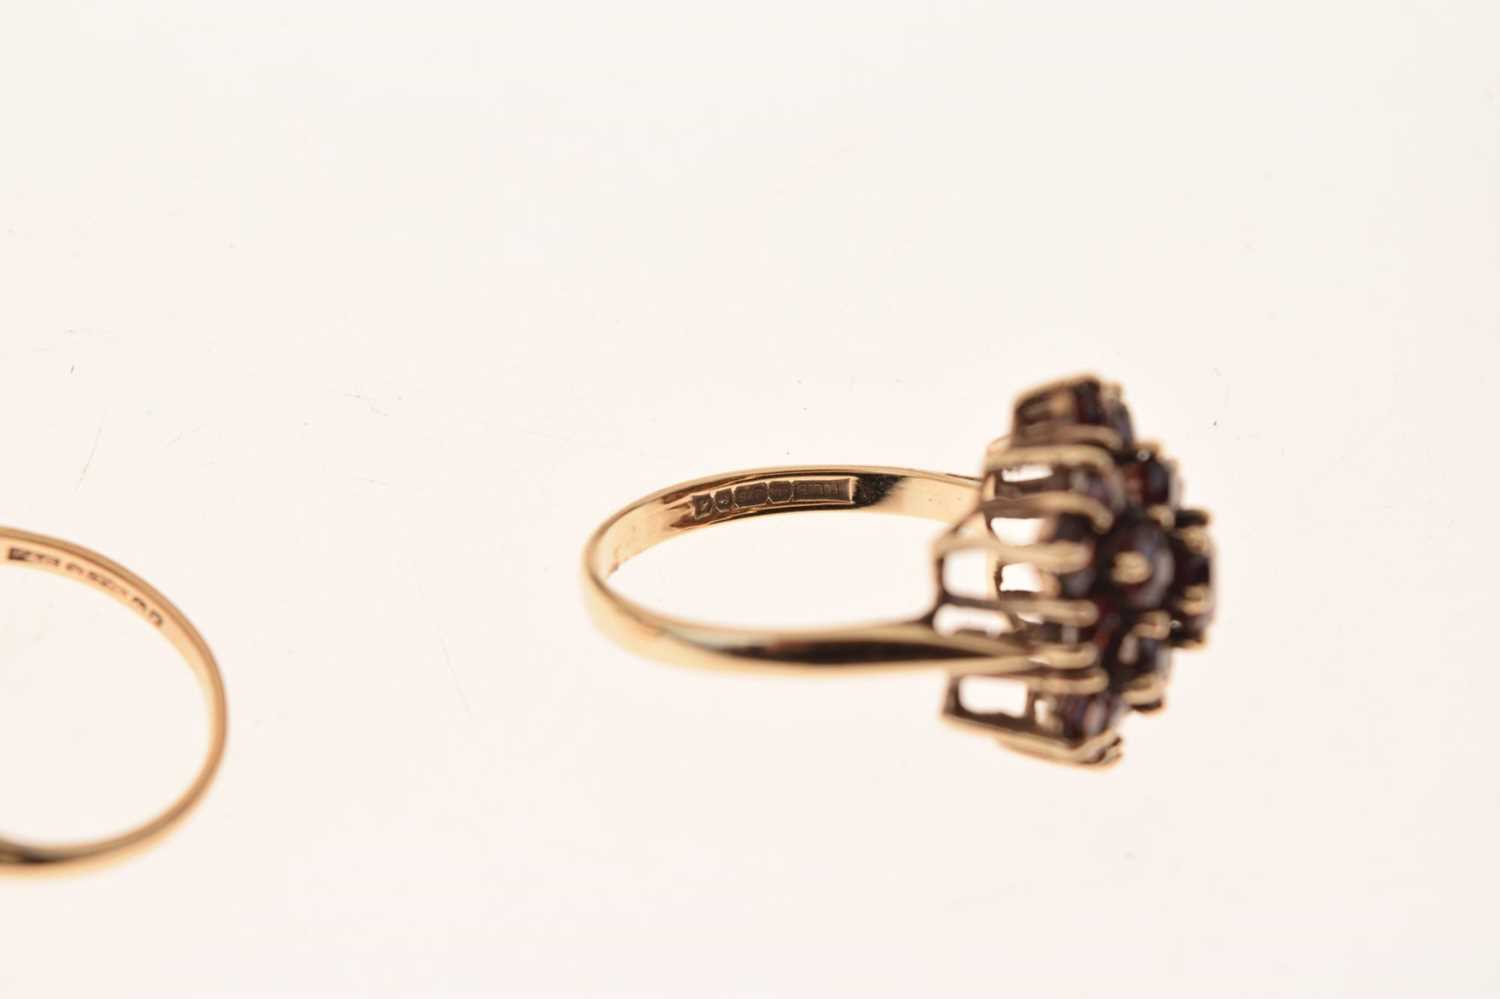 Two 1970s period dress rings - Image 7 of 9